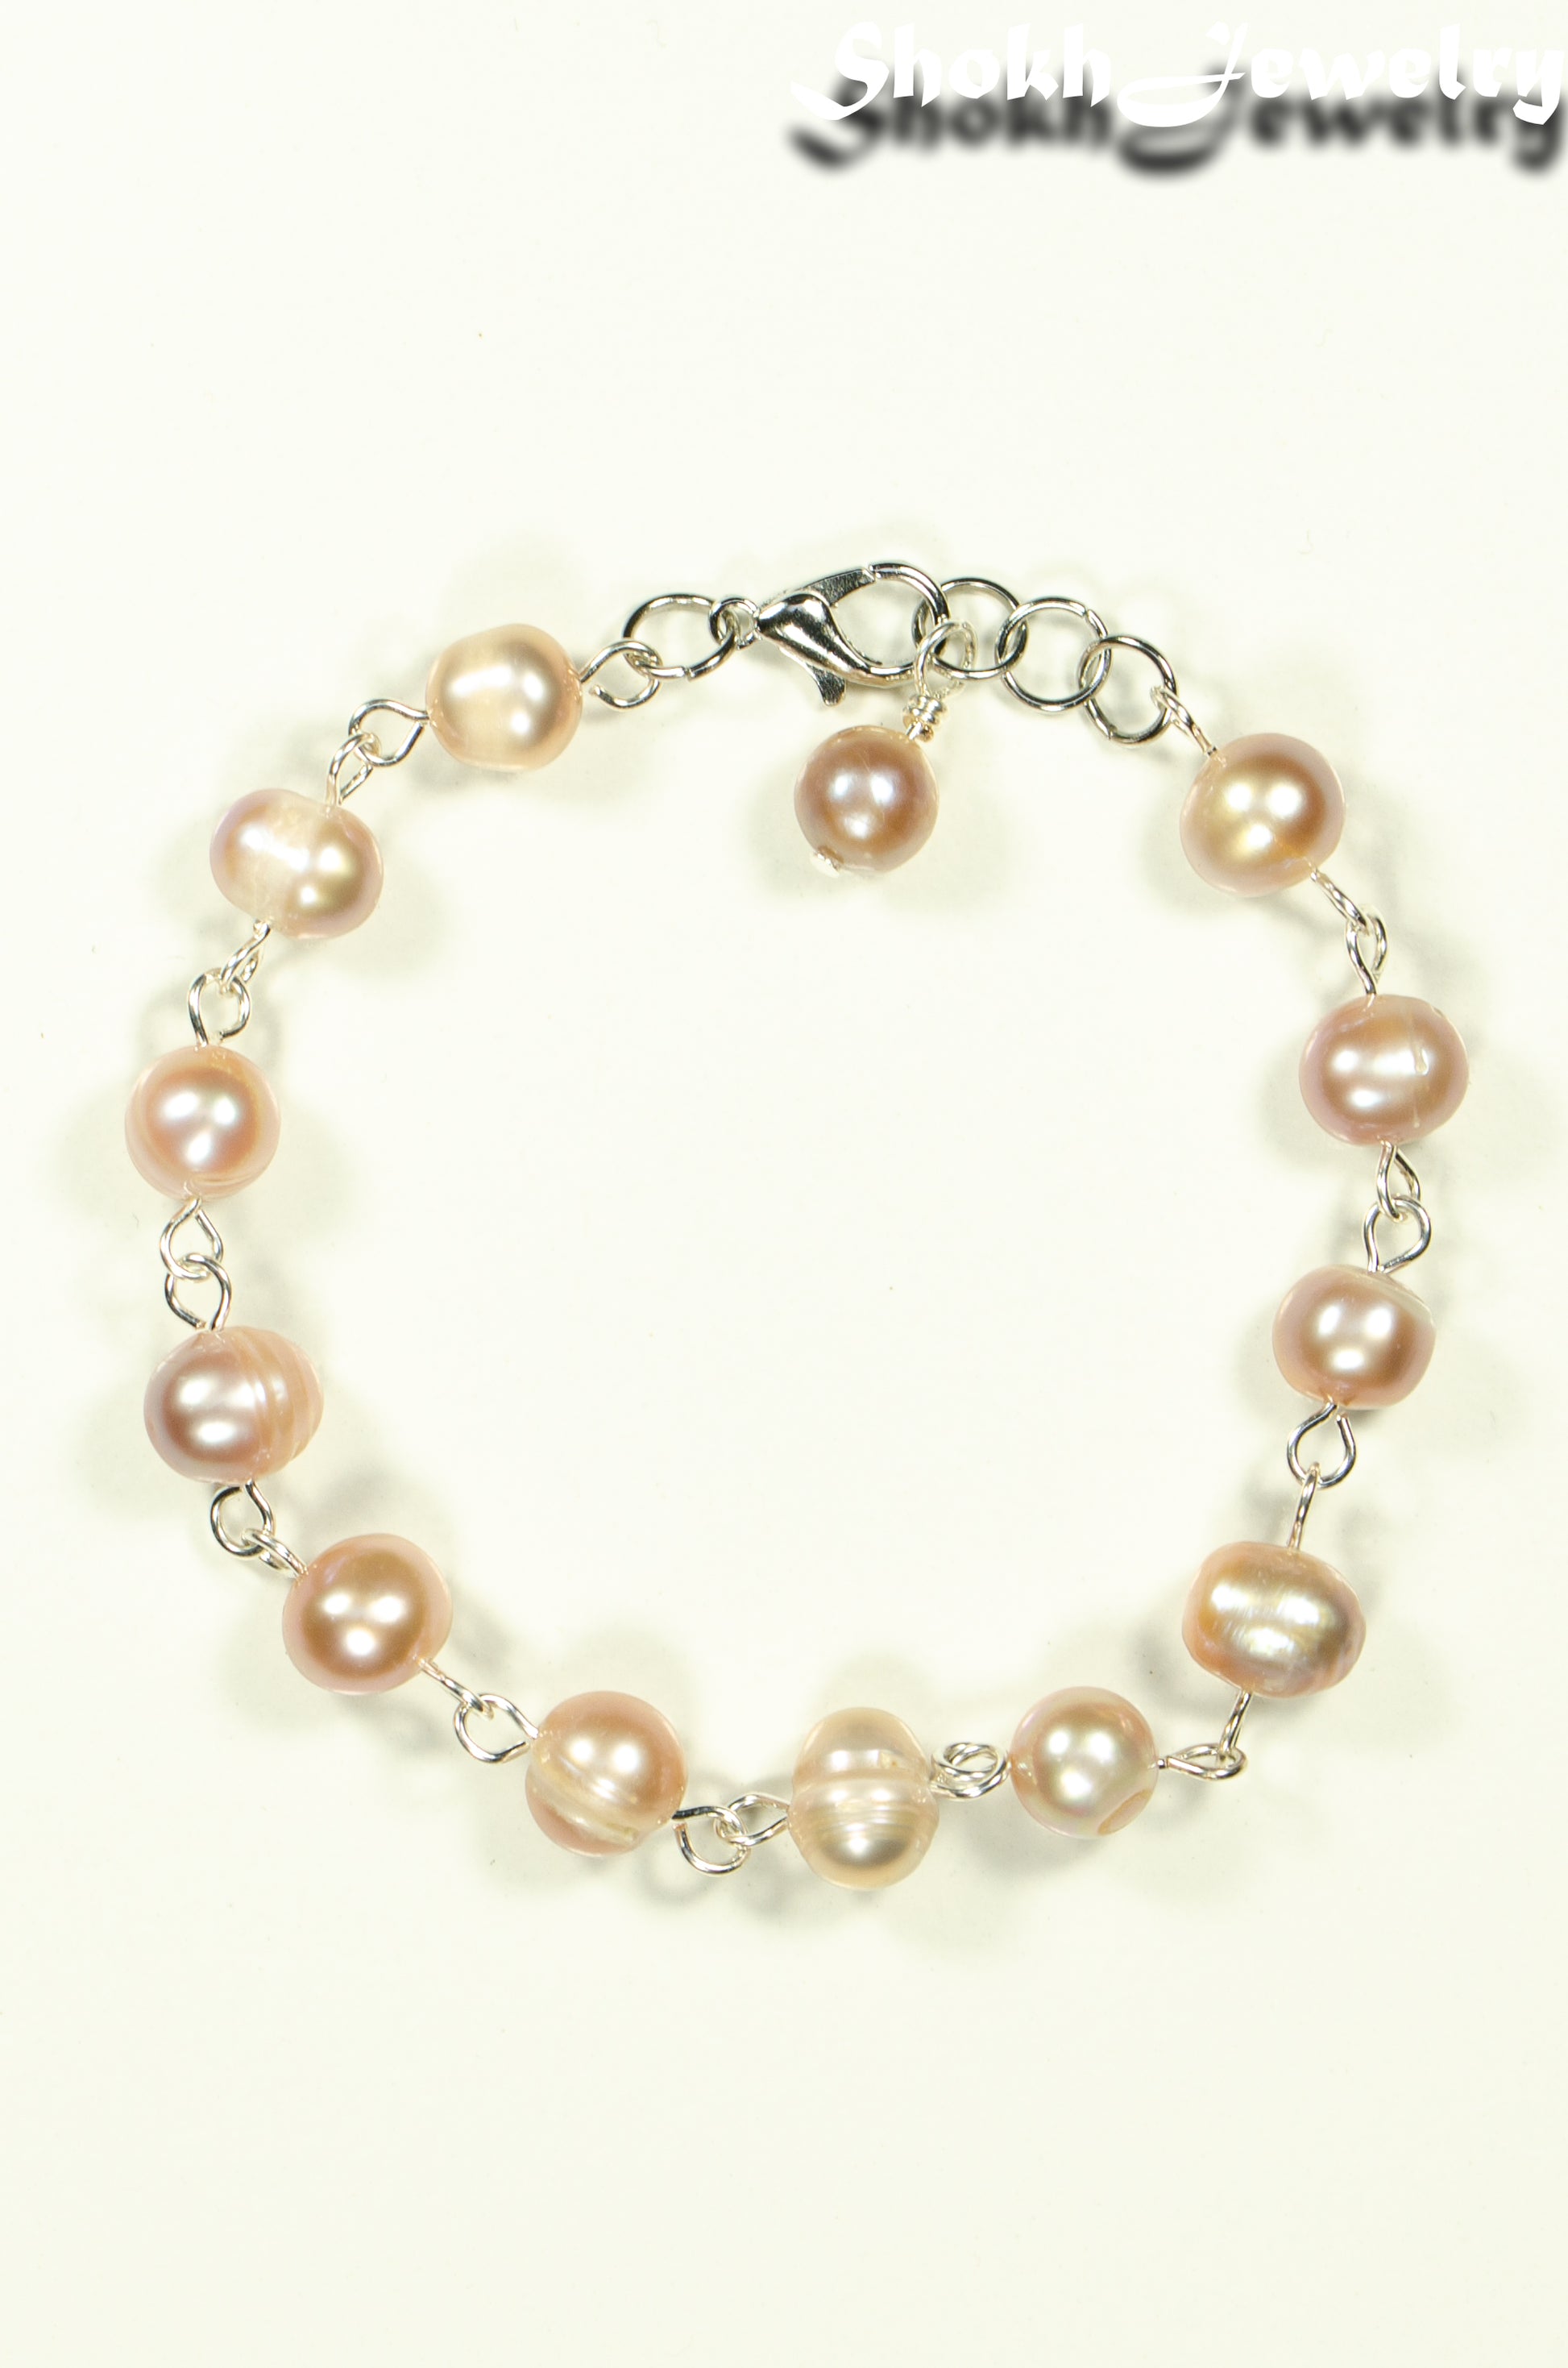 Top view of Lavender Freshwater Pearls Link Chain Bracelet.